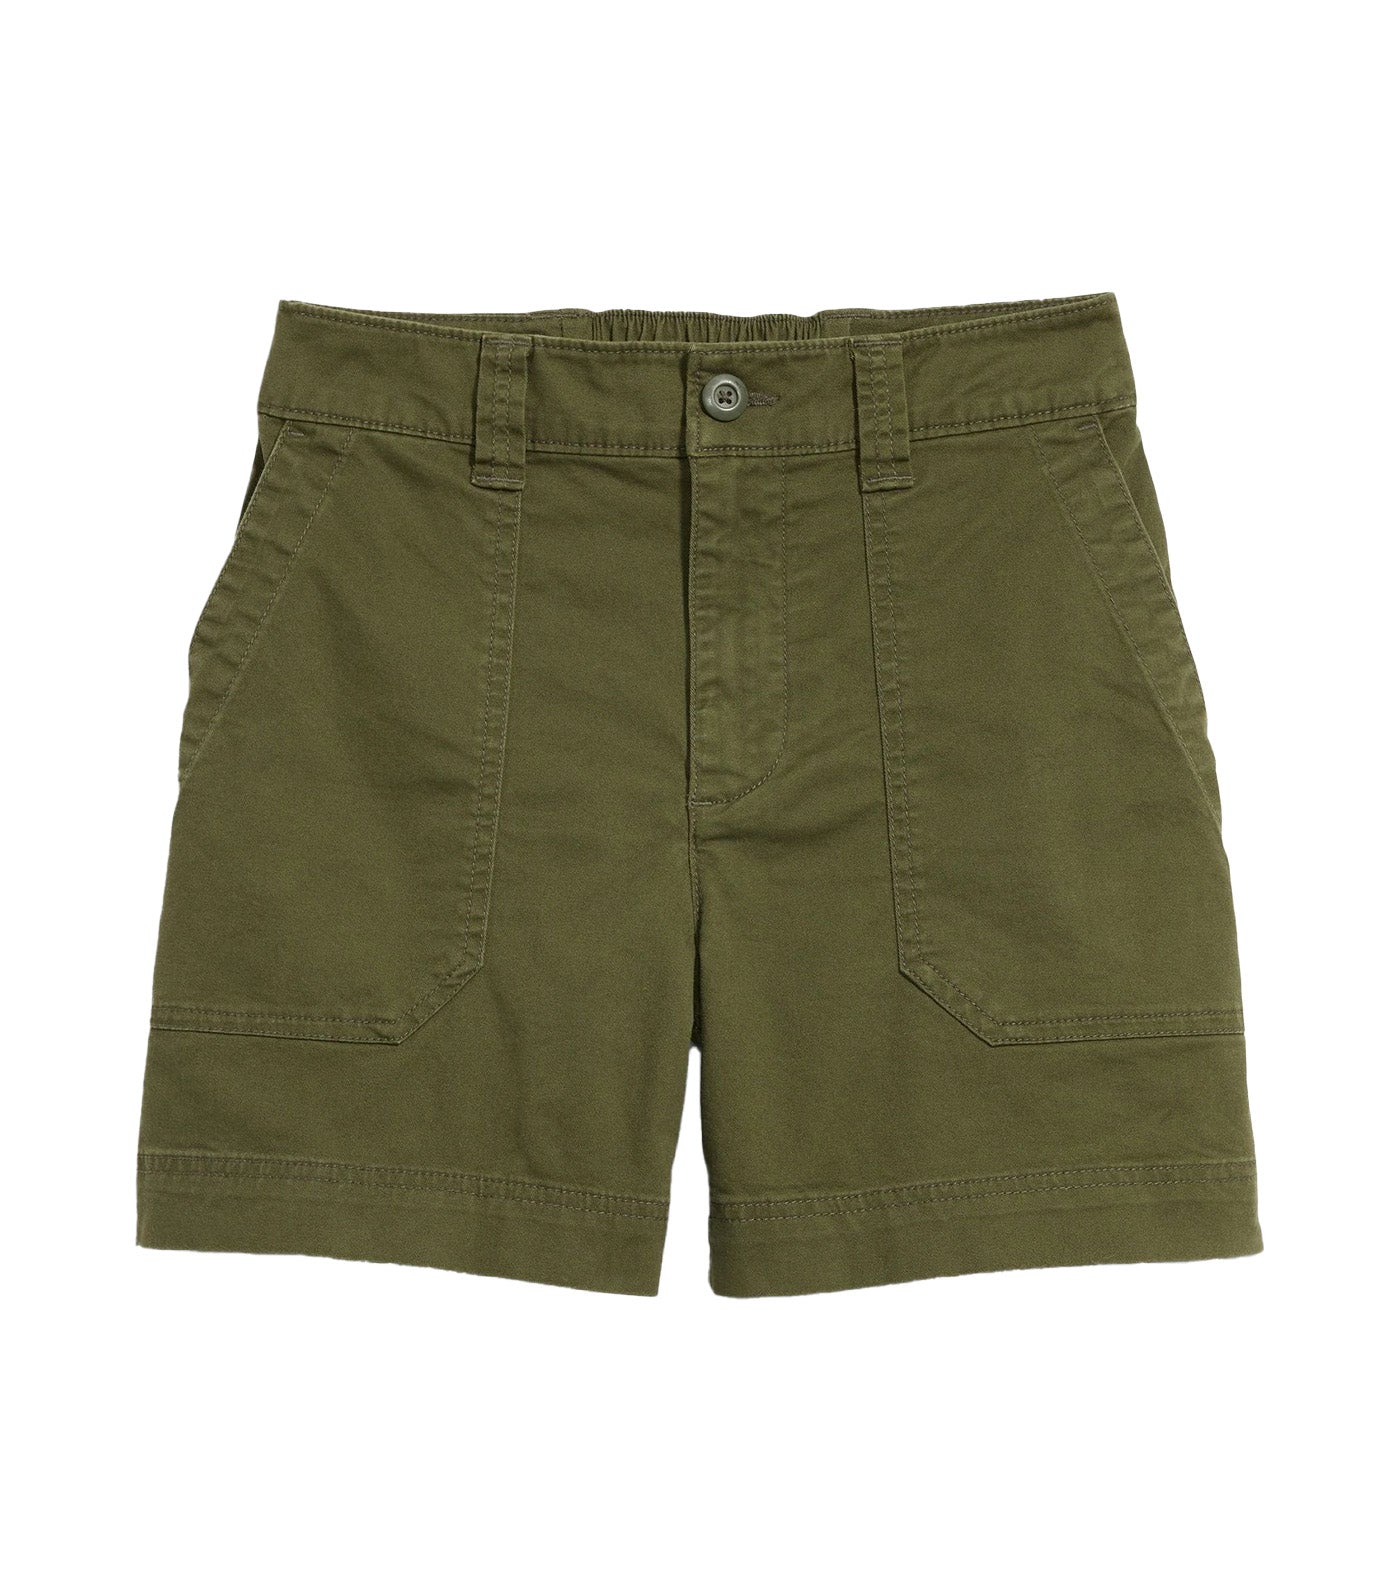 High-Waisted OGC Utility Chino Shorts for Women 5-Inch Inseam Conifer